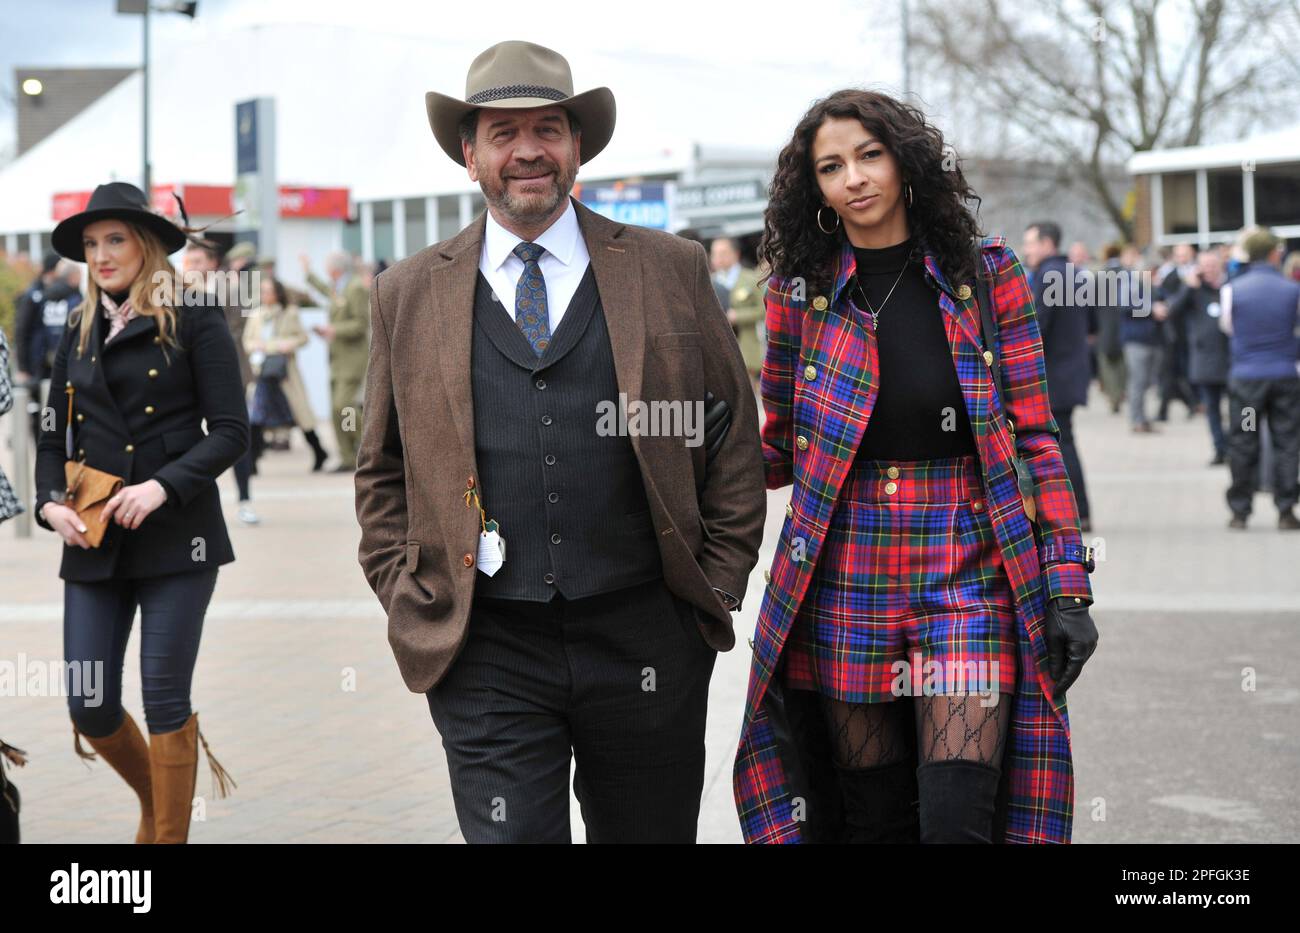 Crowds enter the racecourse including TV presenter from DIY SOS Nick Knowles with girlfriend Katie Dadzie.     Horse racing at Cheltenham Racecourse o Stock Photo